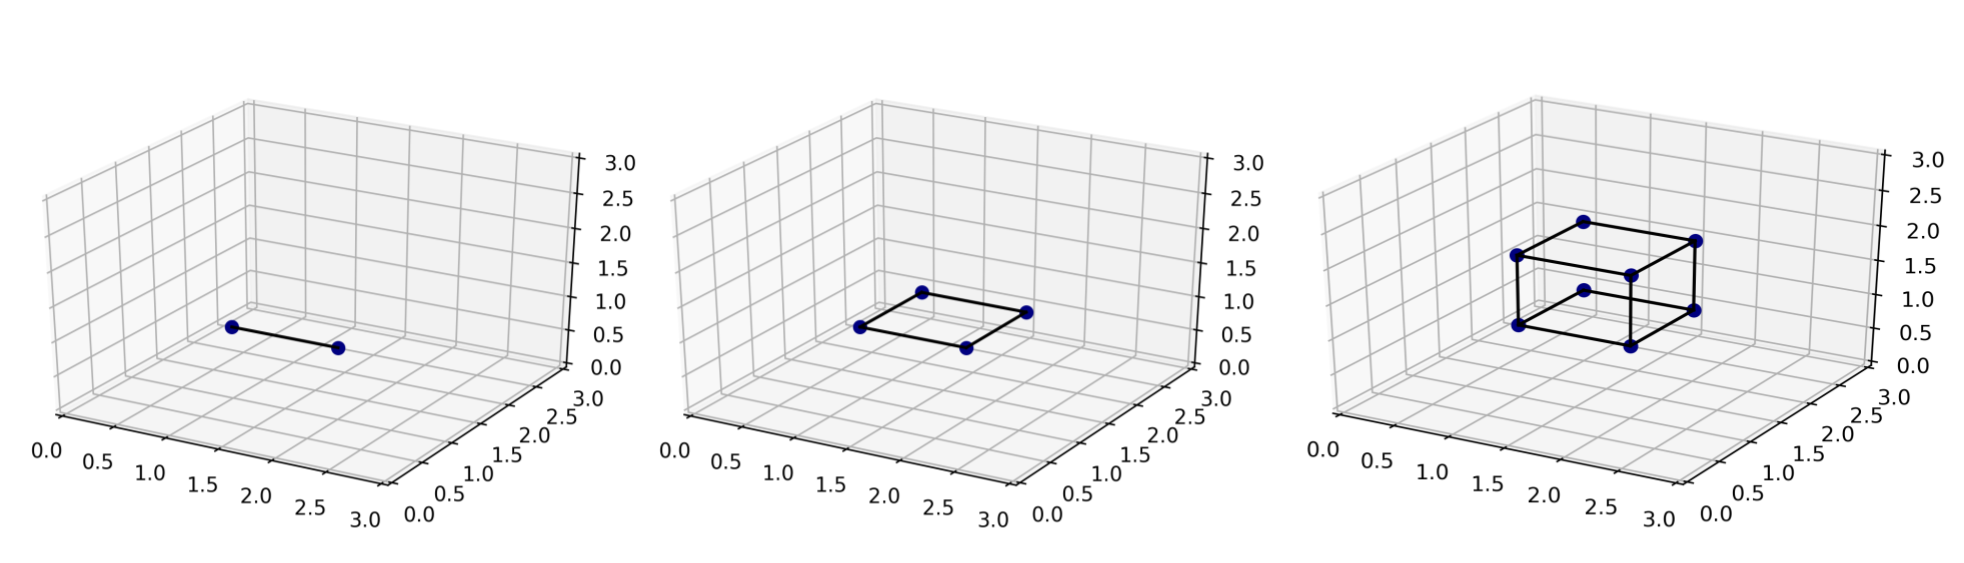 Three 3D plots next to eachother, one with a line between 2 points, one with a plane square between 4 points, and one with a cube between 8 points.